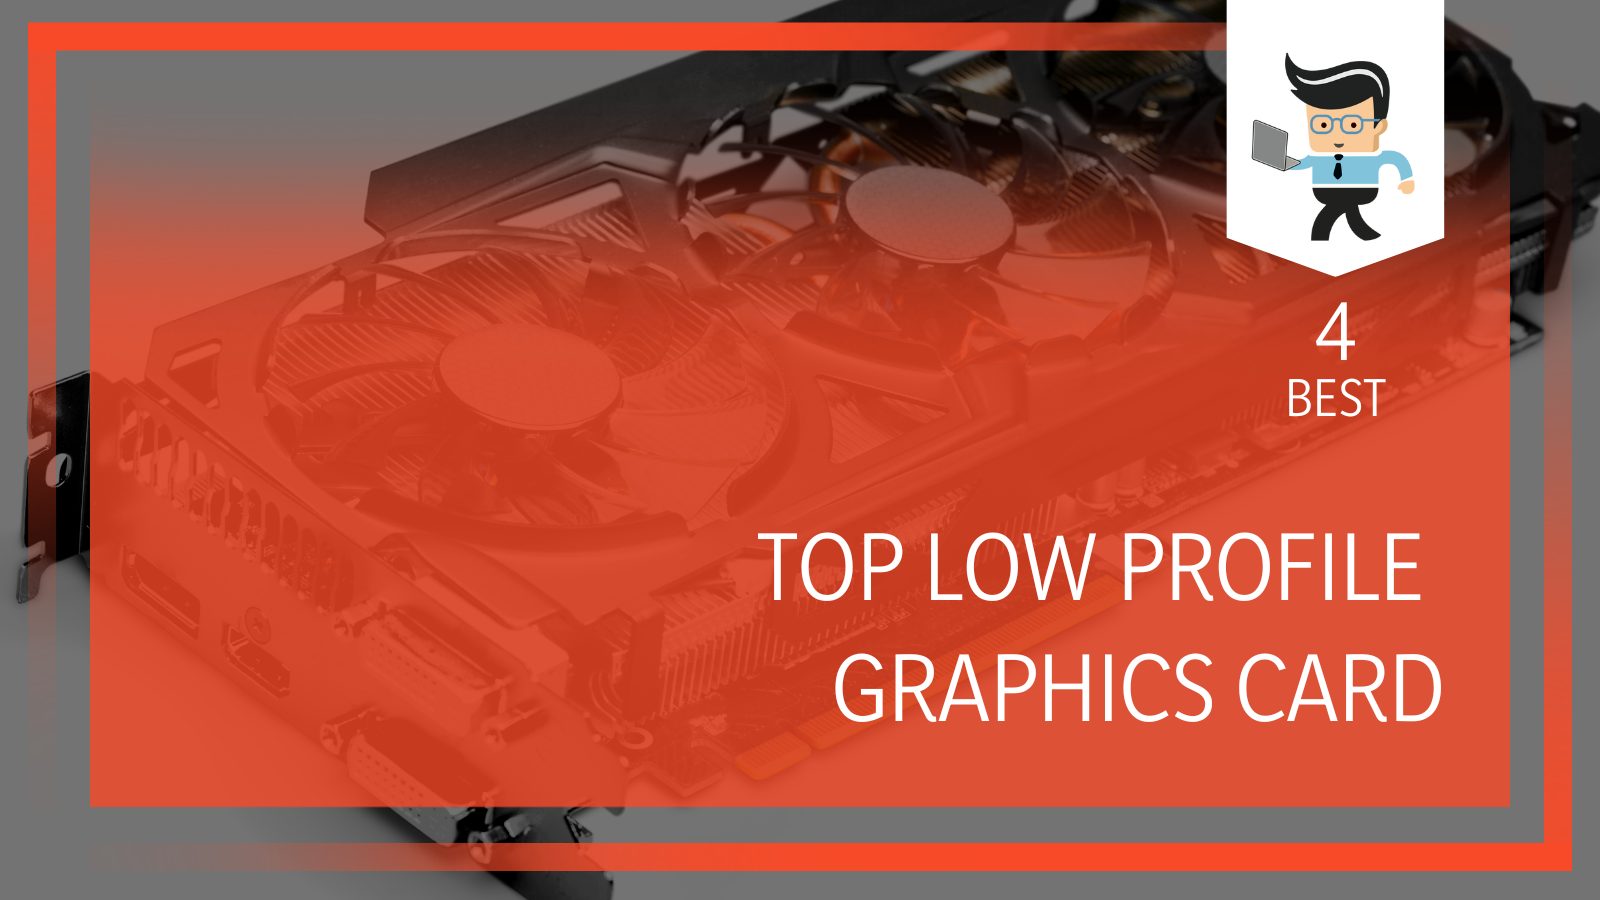 What is the Best Low Profile Graphics Card